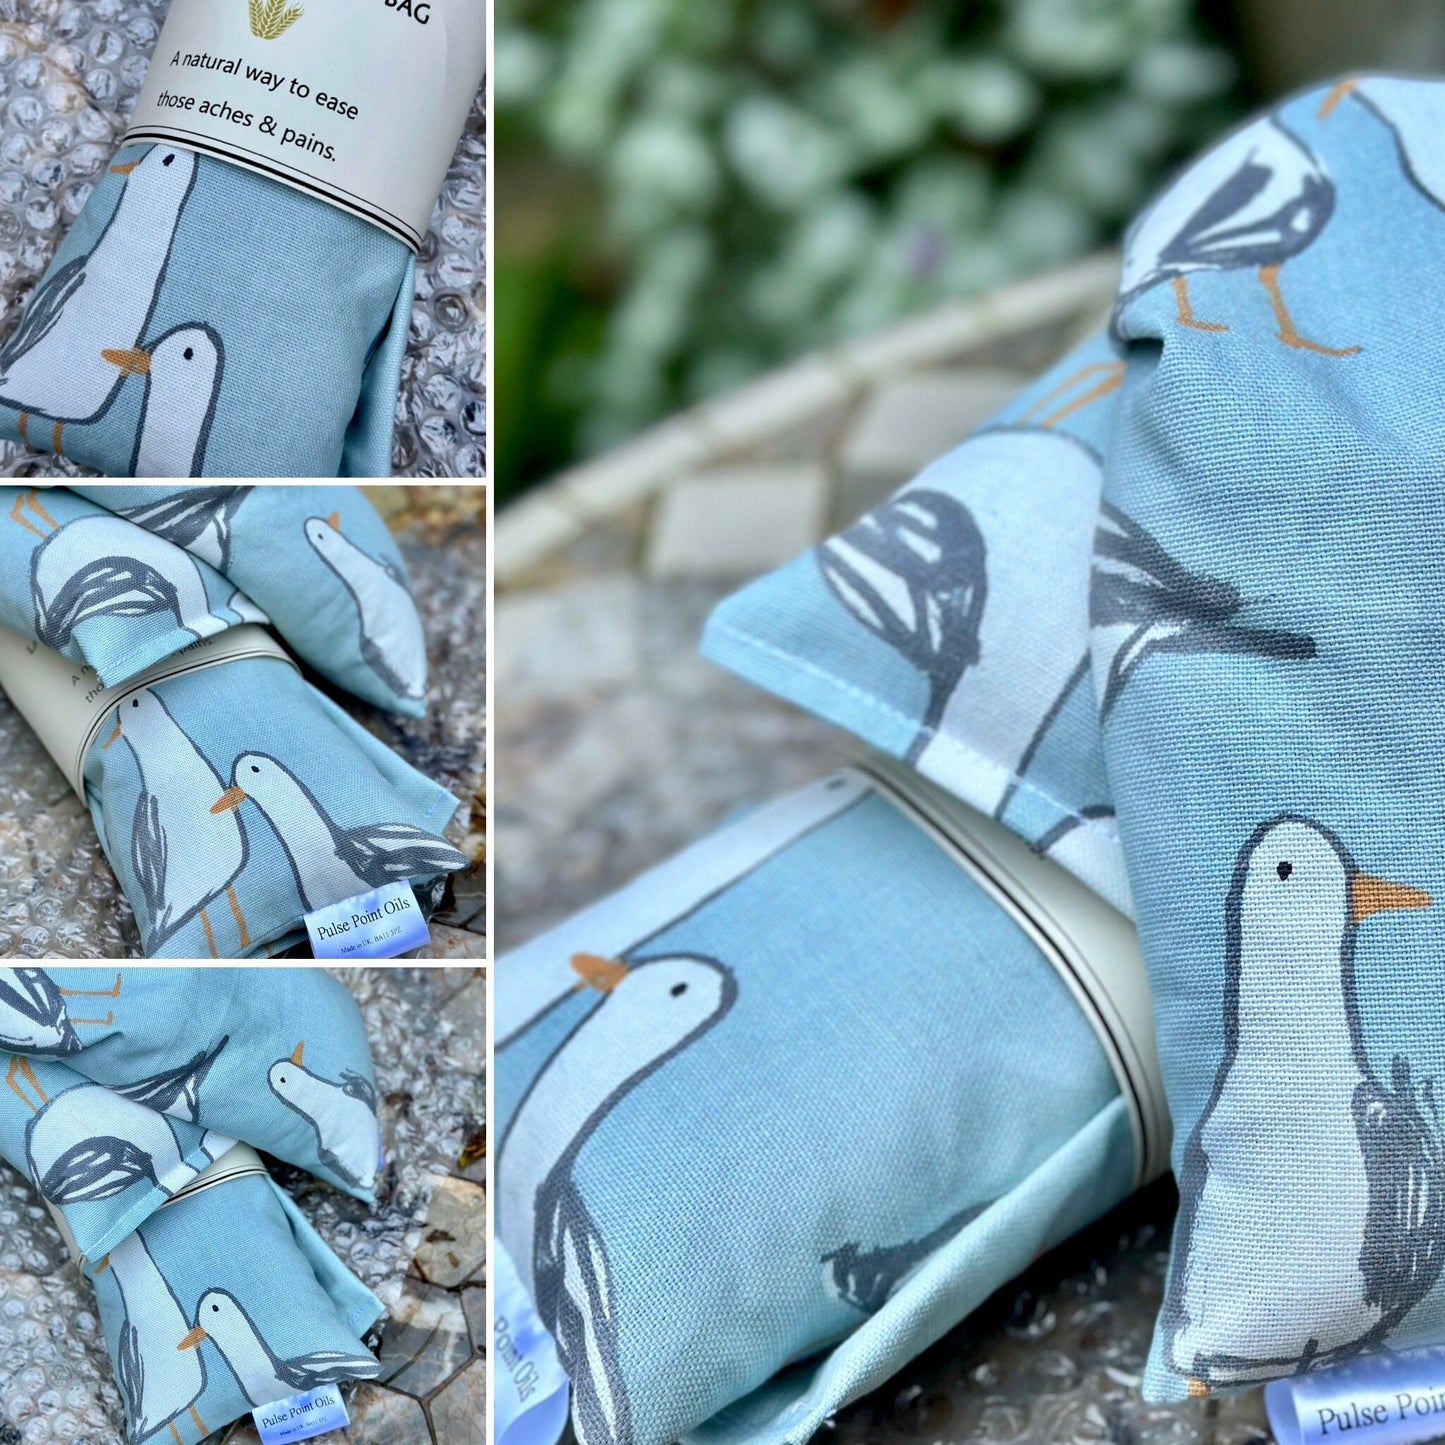 multiple photos of the lavender scented long wheat bag, seagull print Heat pad body warmer.